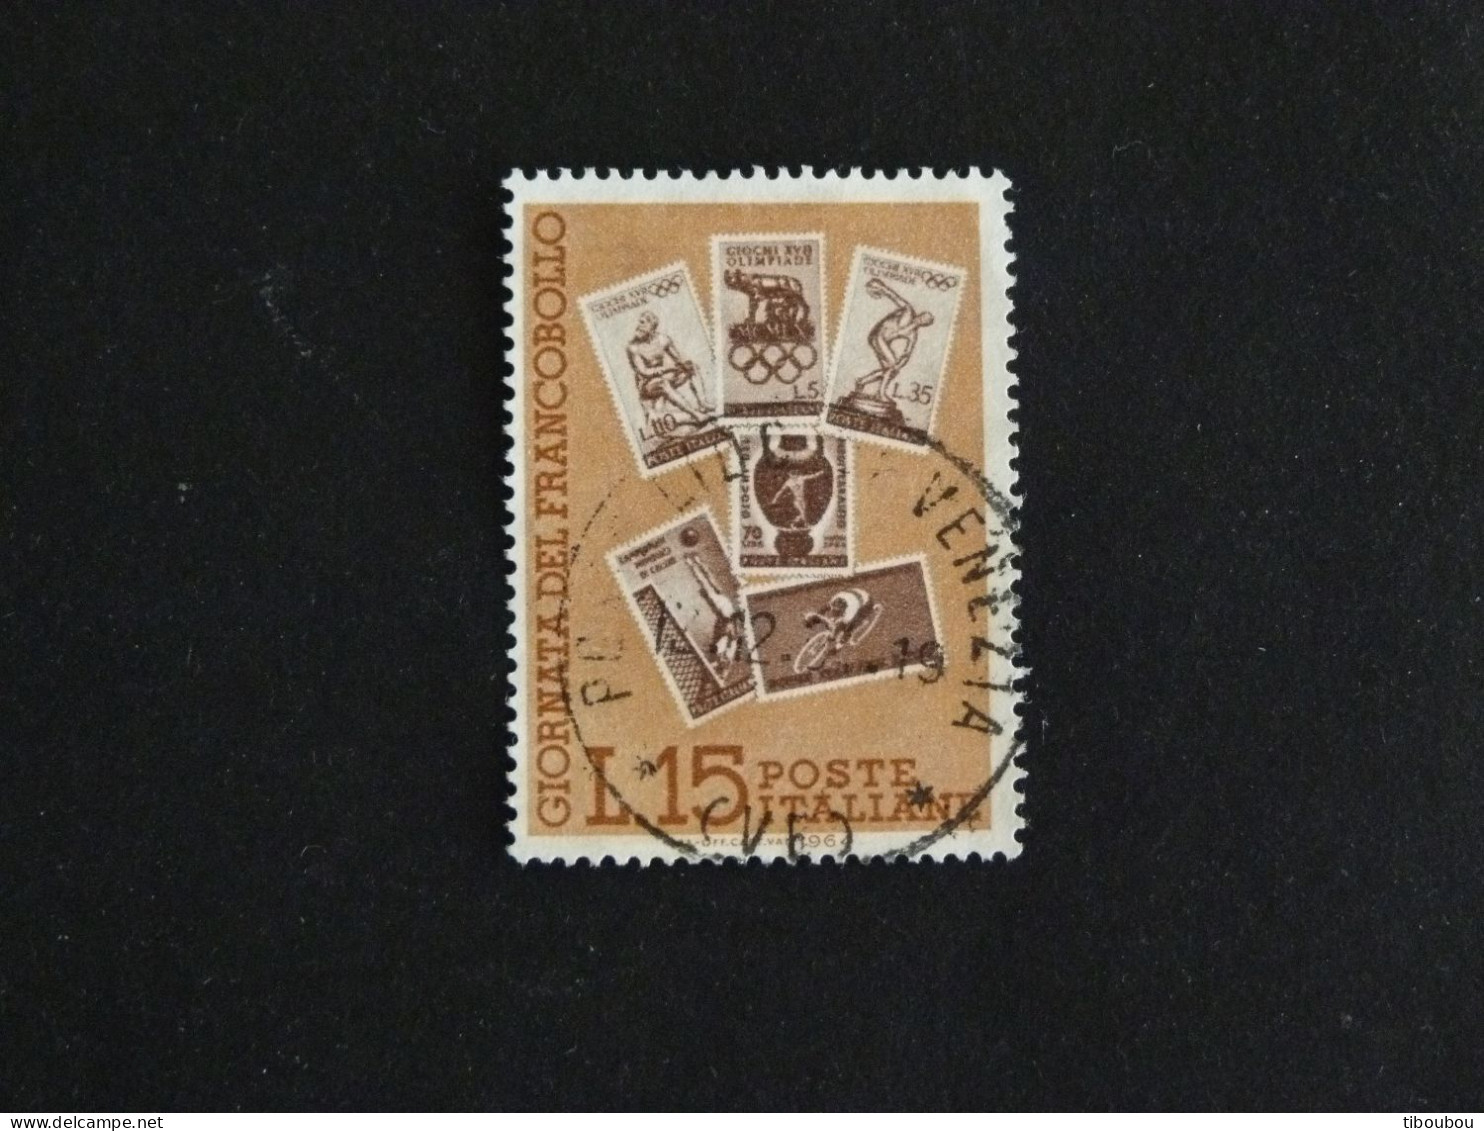 ITALIE ITALIA YT 915 OBLITERE - Journee Du Timbre / Timbre Sur Timbre - 1961-70: Used